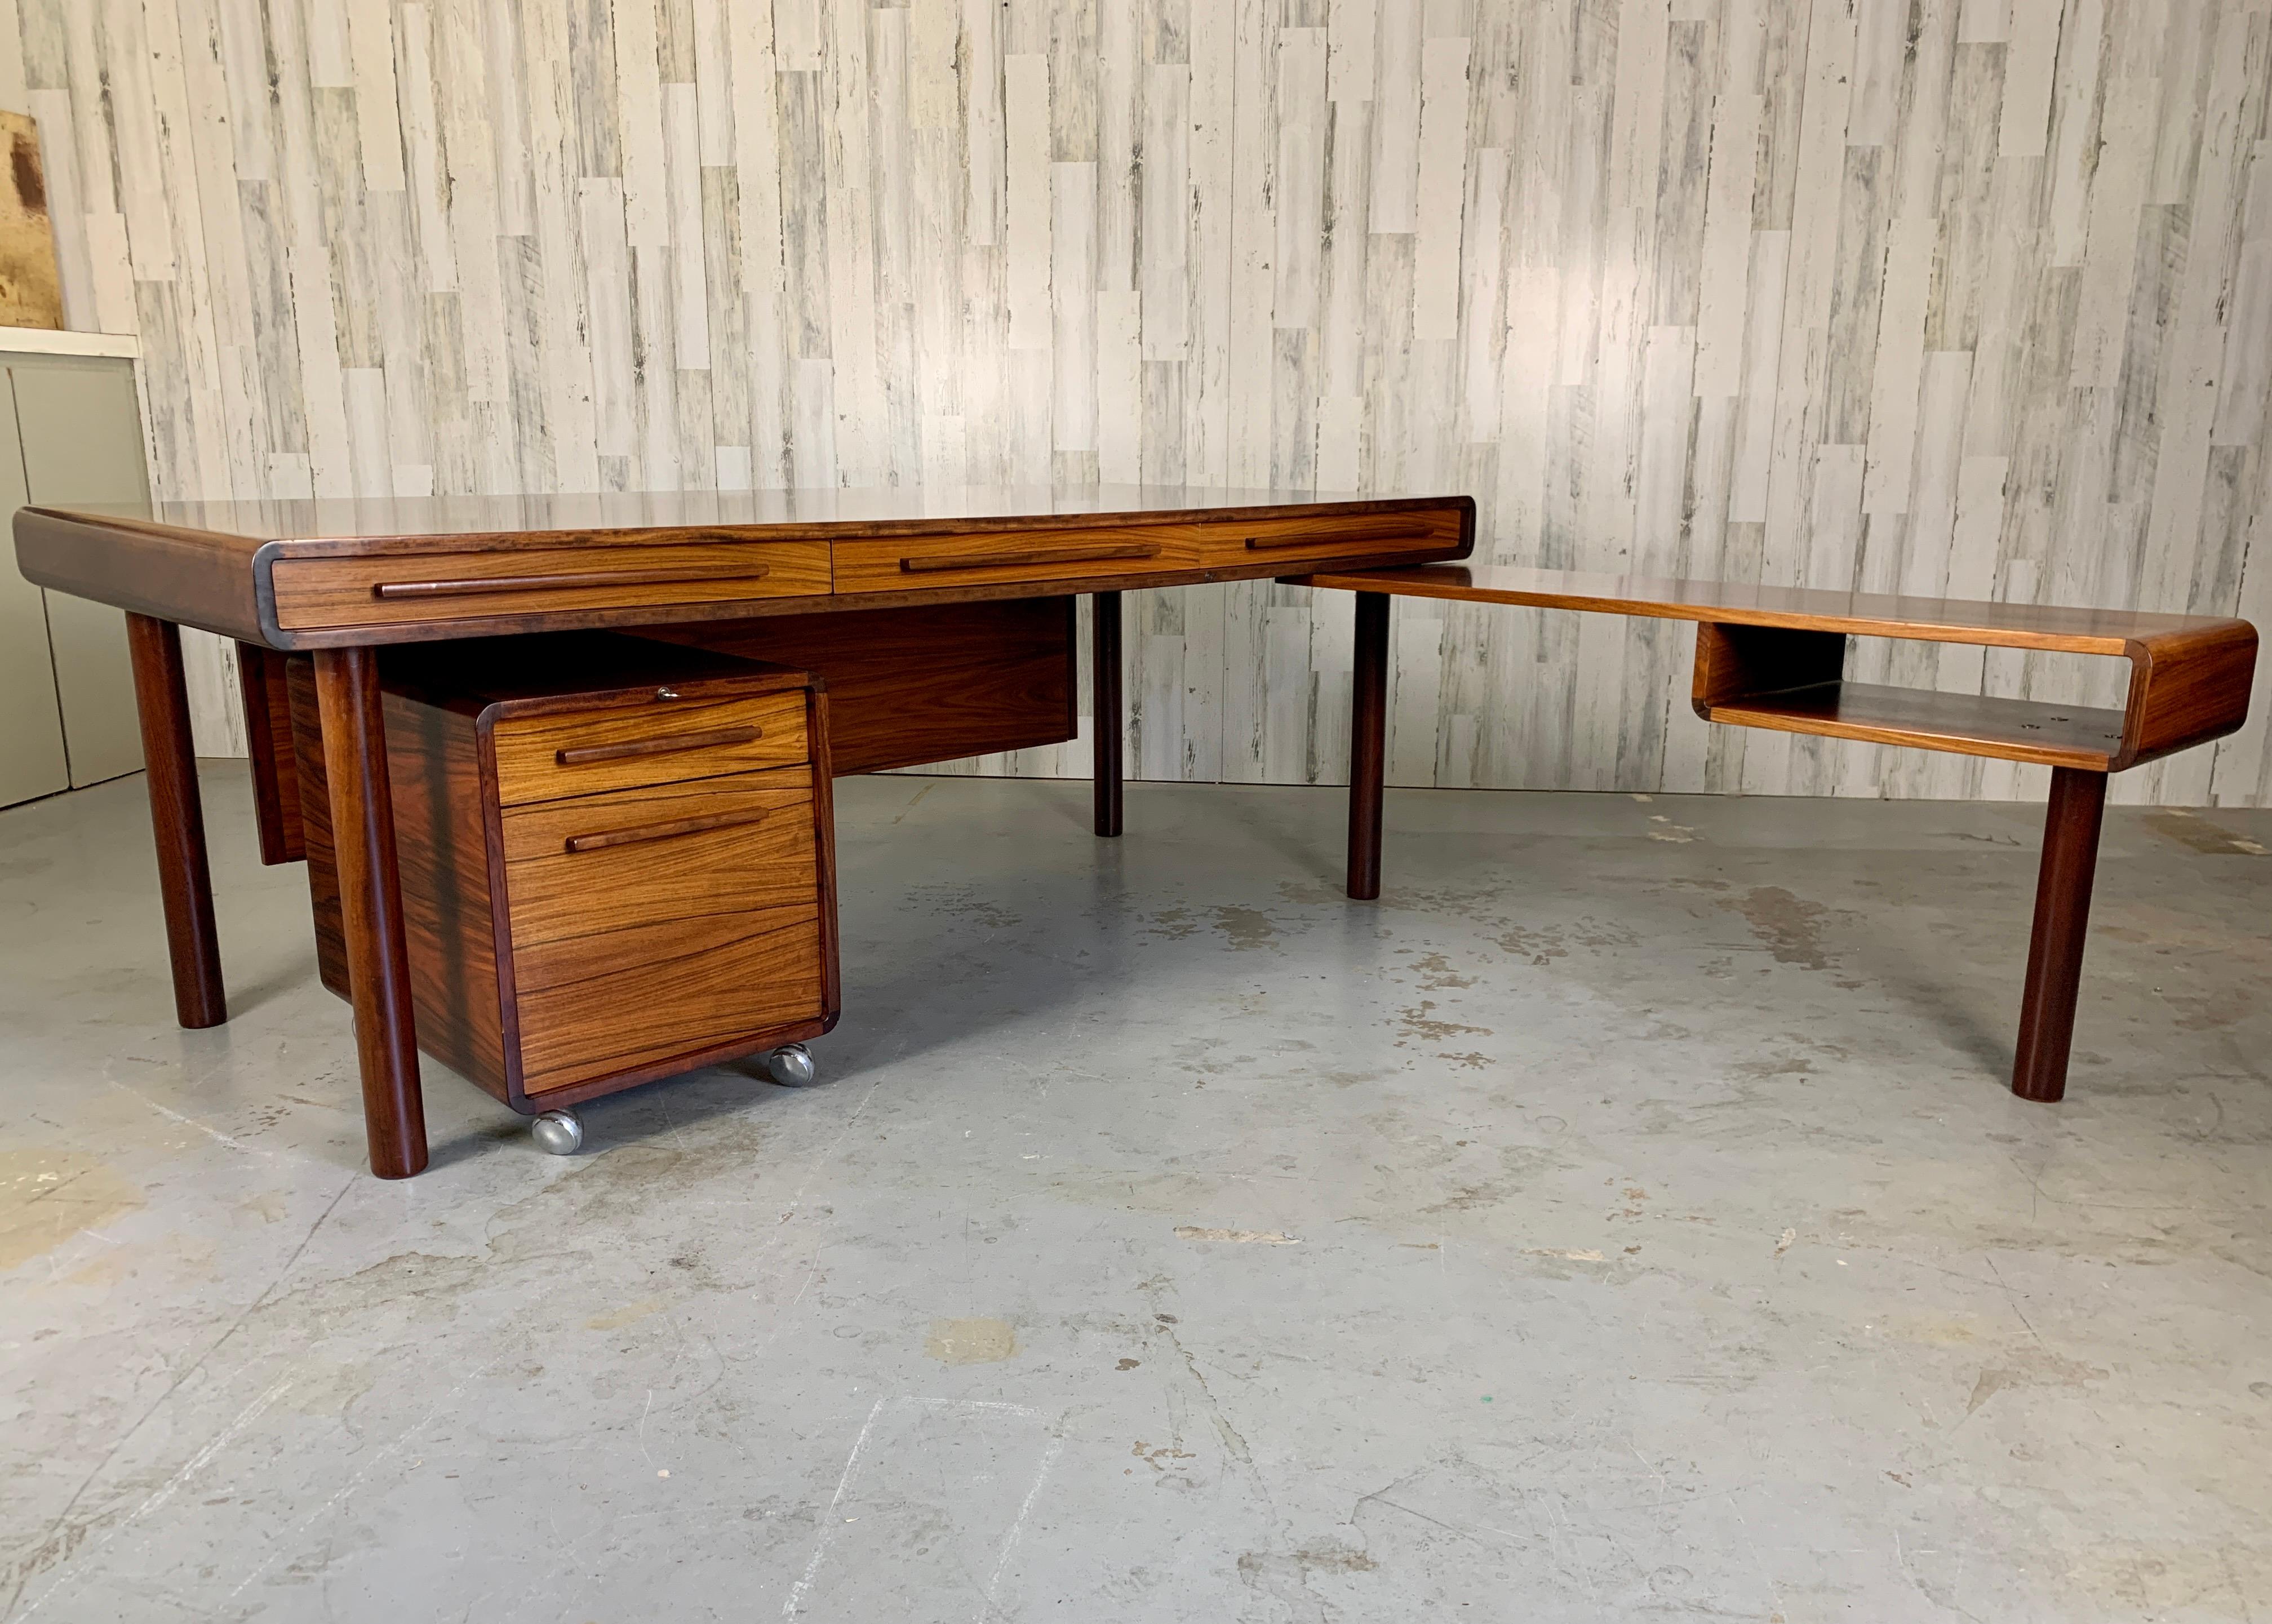 Brazilian Rosewood Danish Modern large desk with side credenza that can be mounted on either side of the desk and Island file drawer cabinet on casters. Also a removable modesty panel. Designer: Svend Dyrlund for Dyrlund
Side Extension desk: 48W x